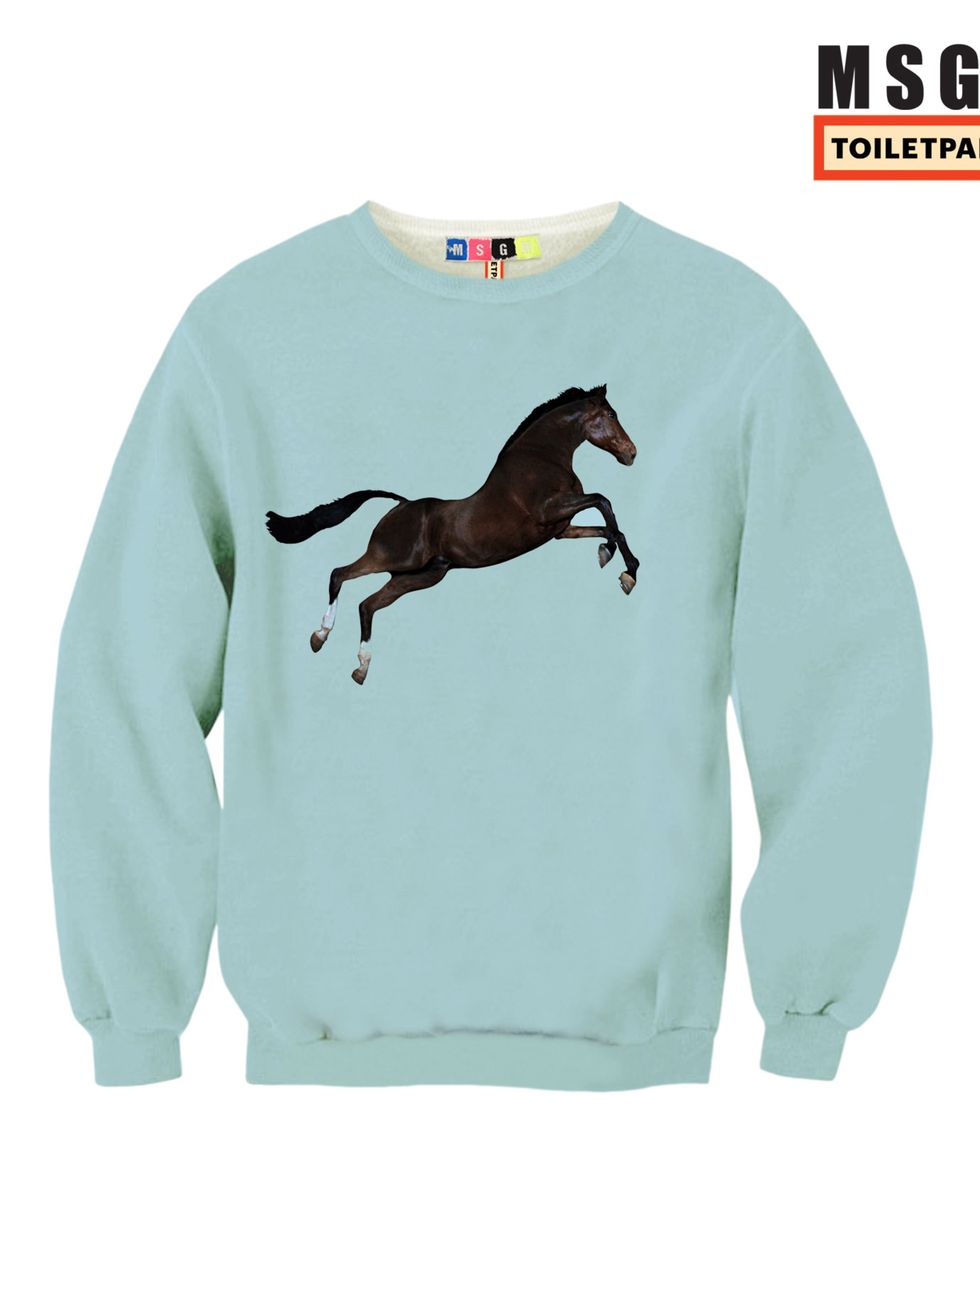 Sleeve, Teal, Terrestrial animal, Turquoise, Aqua, Liver, Long-sleeved t-shirt, Mythical creature, Active shirt, Dragon, 